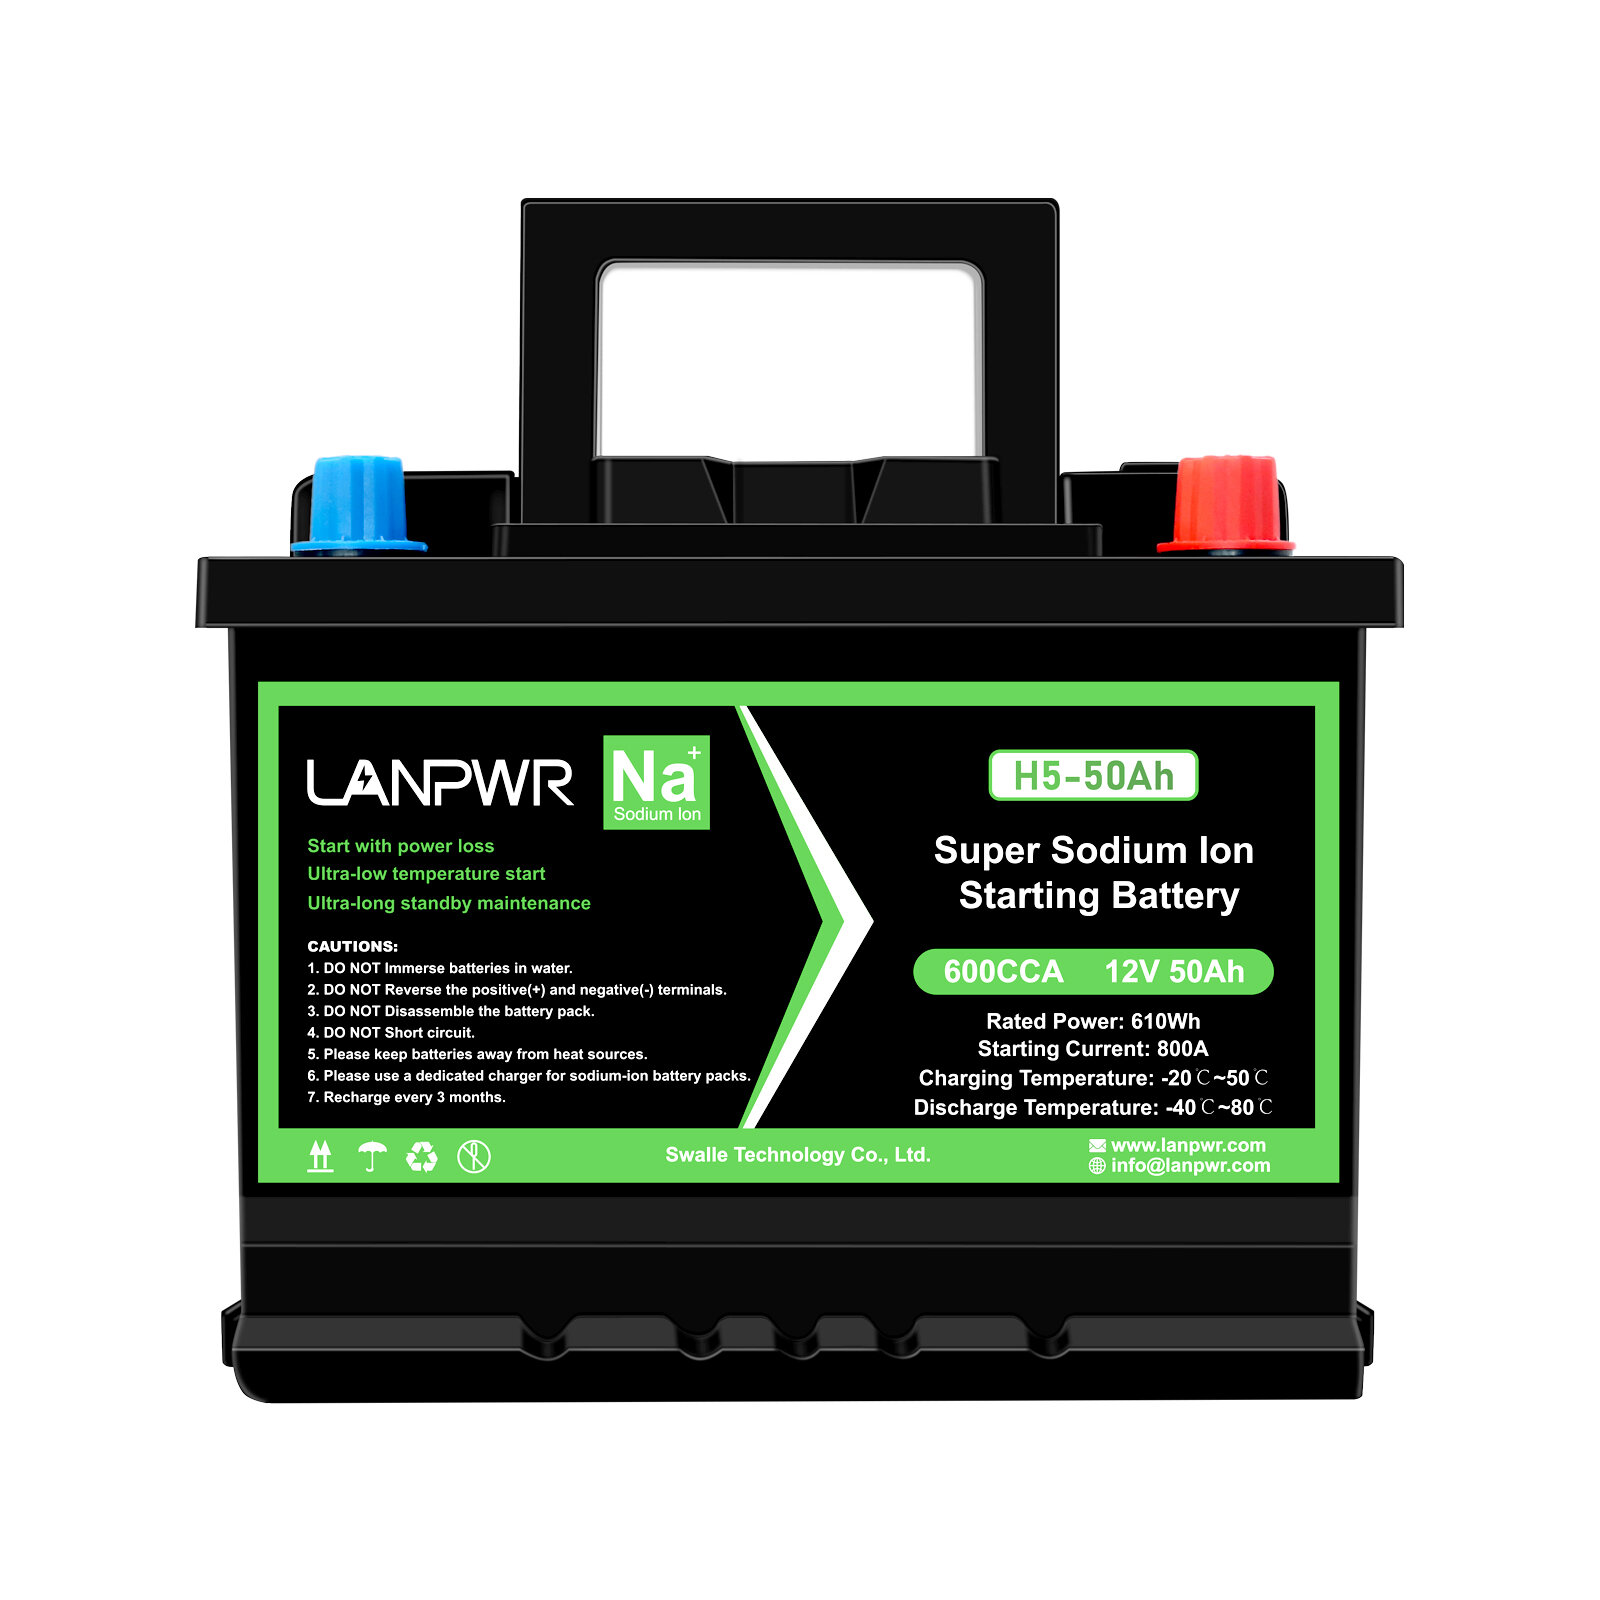 [EU Direct] LANPWR 600CCA 12V 50Ah Sodium Ion Starting Battery 610Wh Energy High Power Fast Charging 6000 Cycles Battery Built-in BMS for Boat Solar Power System EV RV Golf Cart Camping